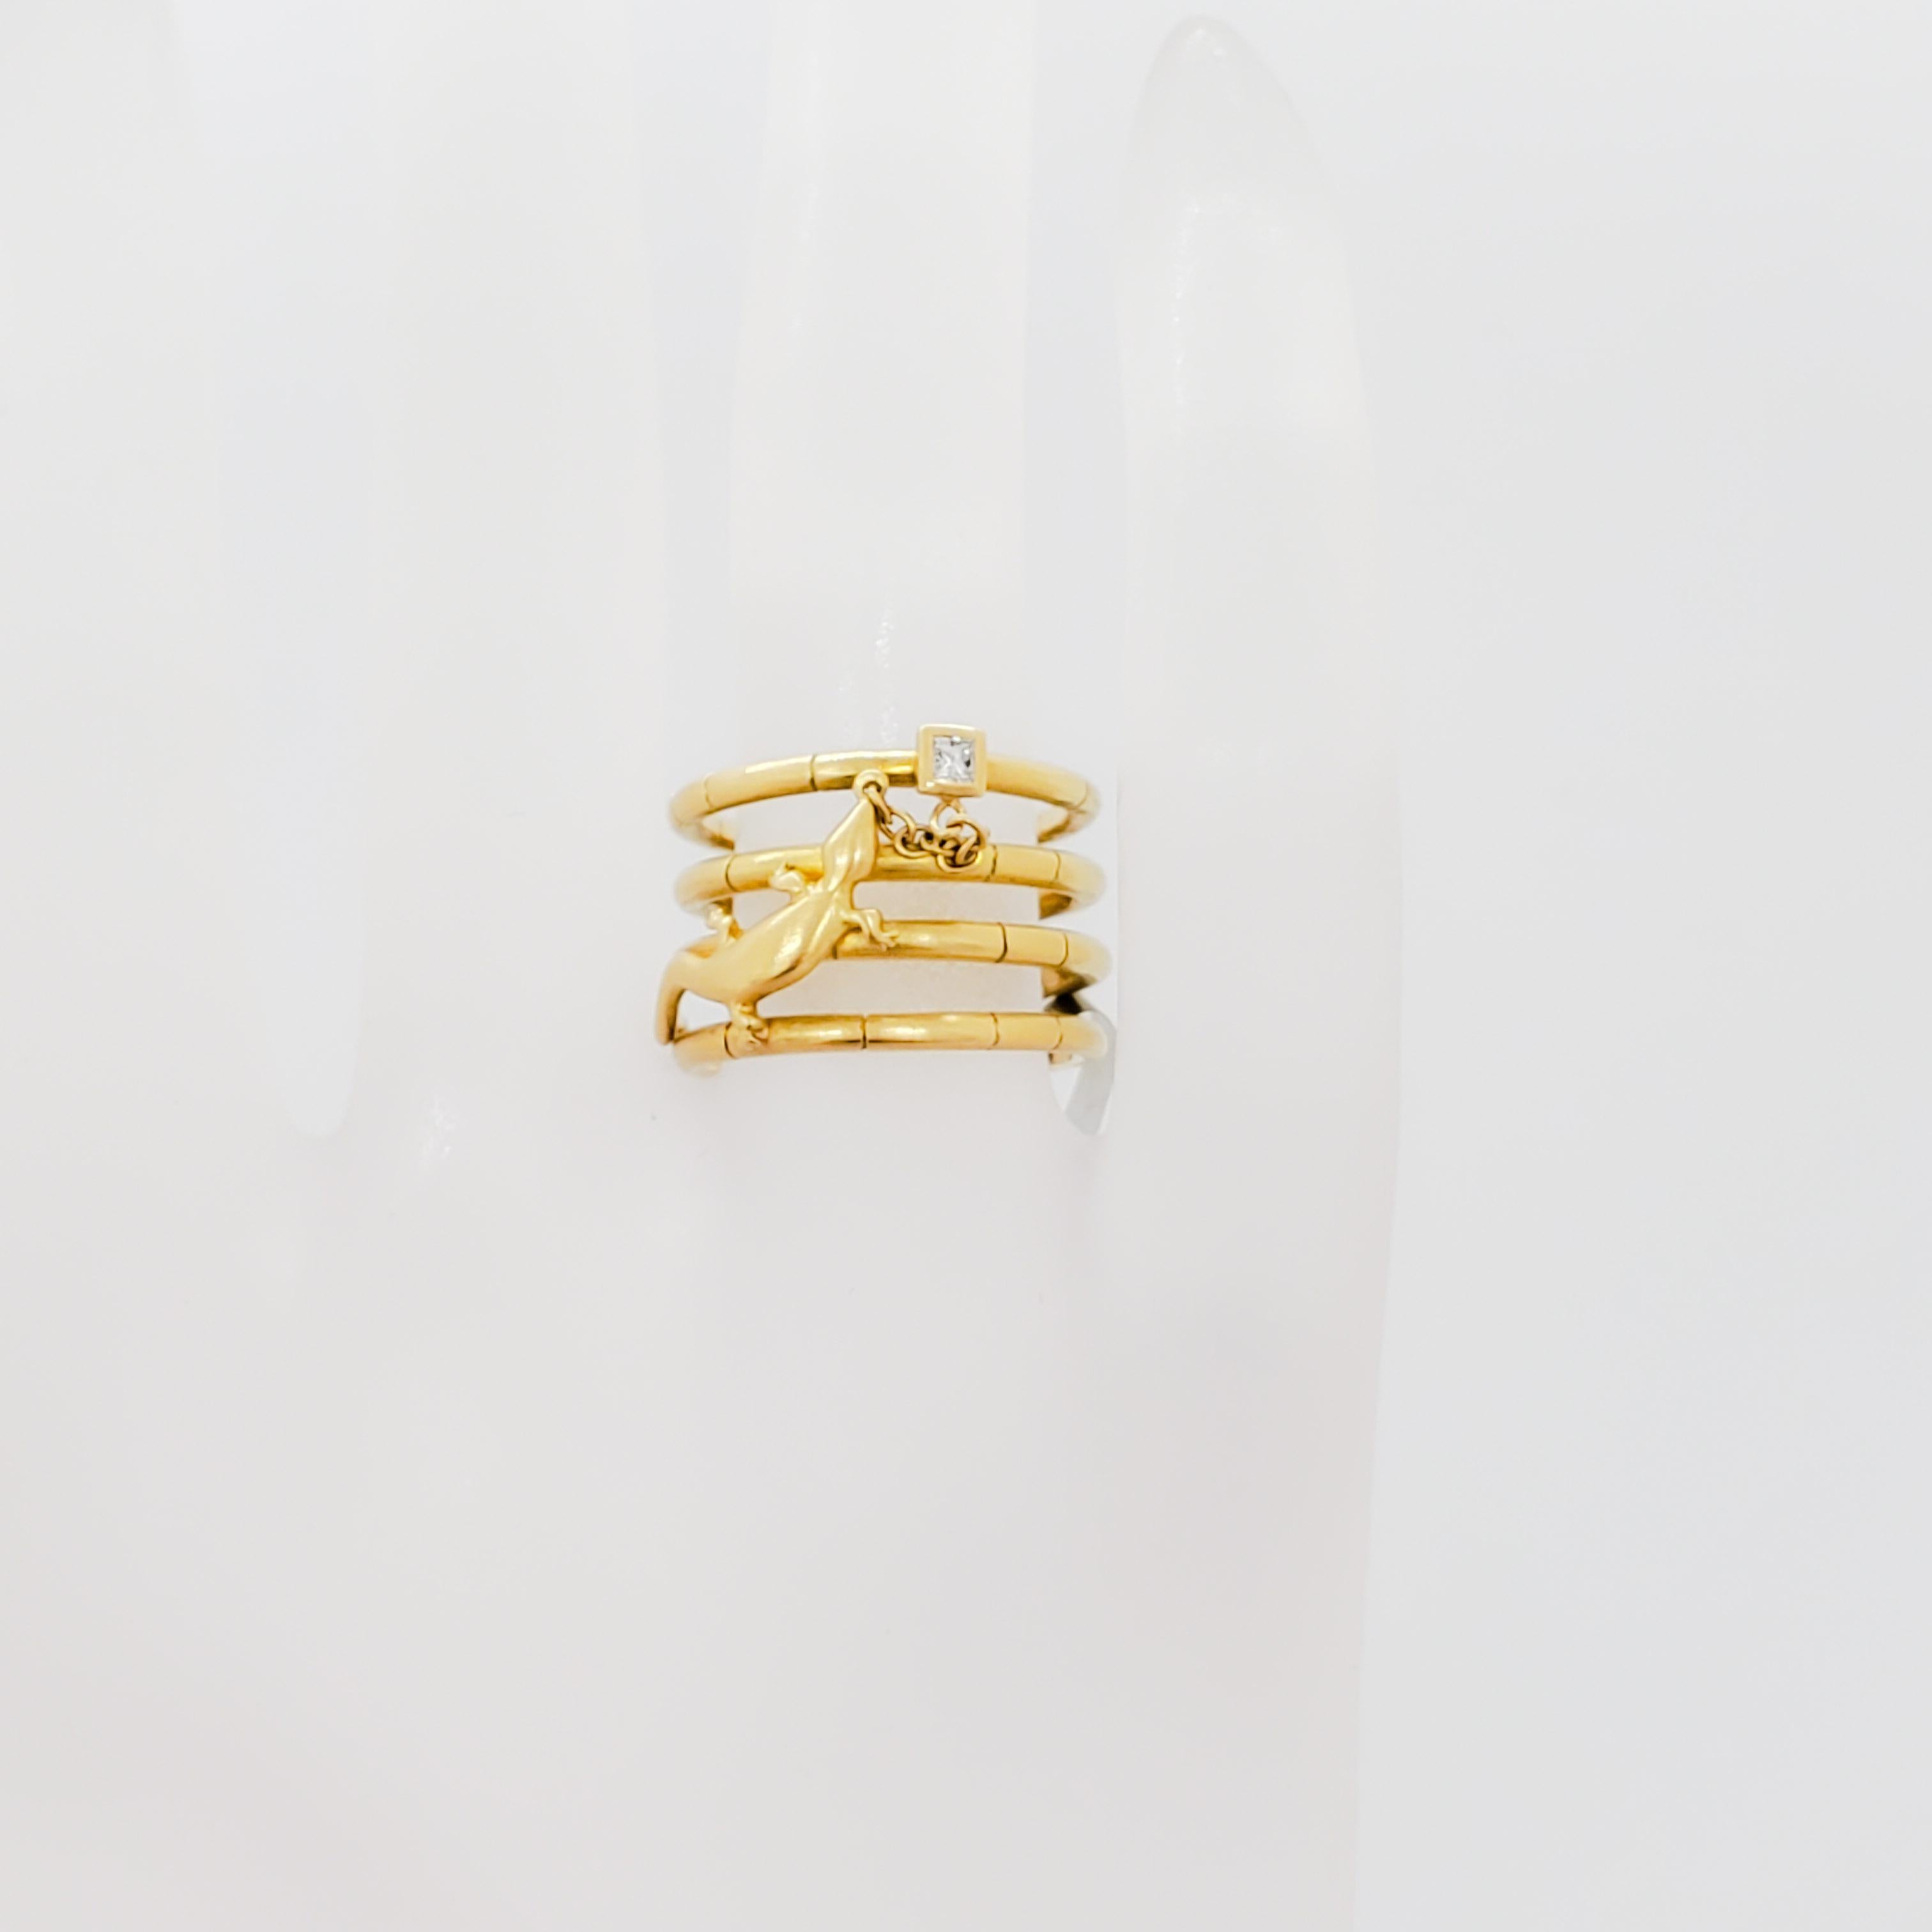 H. Stern Diamond and Gold Stacked Ring in 18k 3